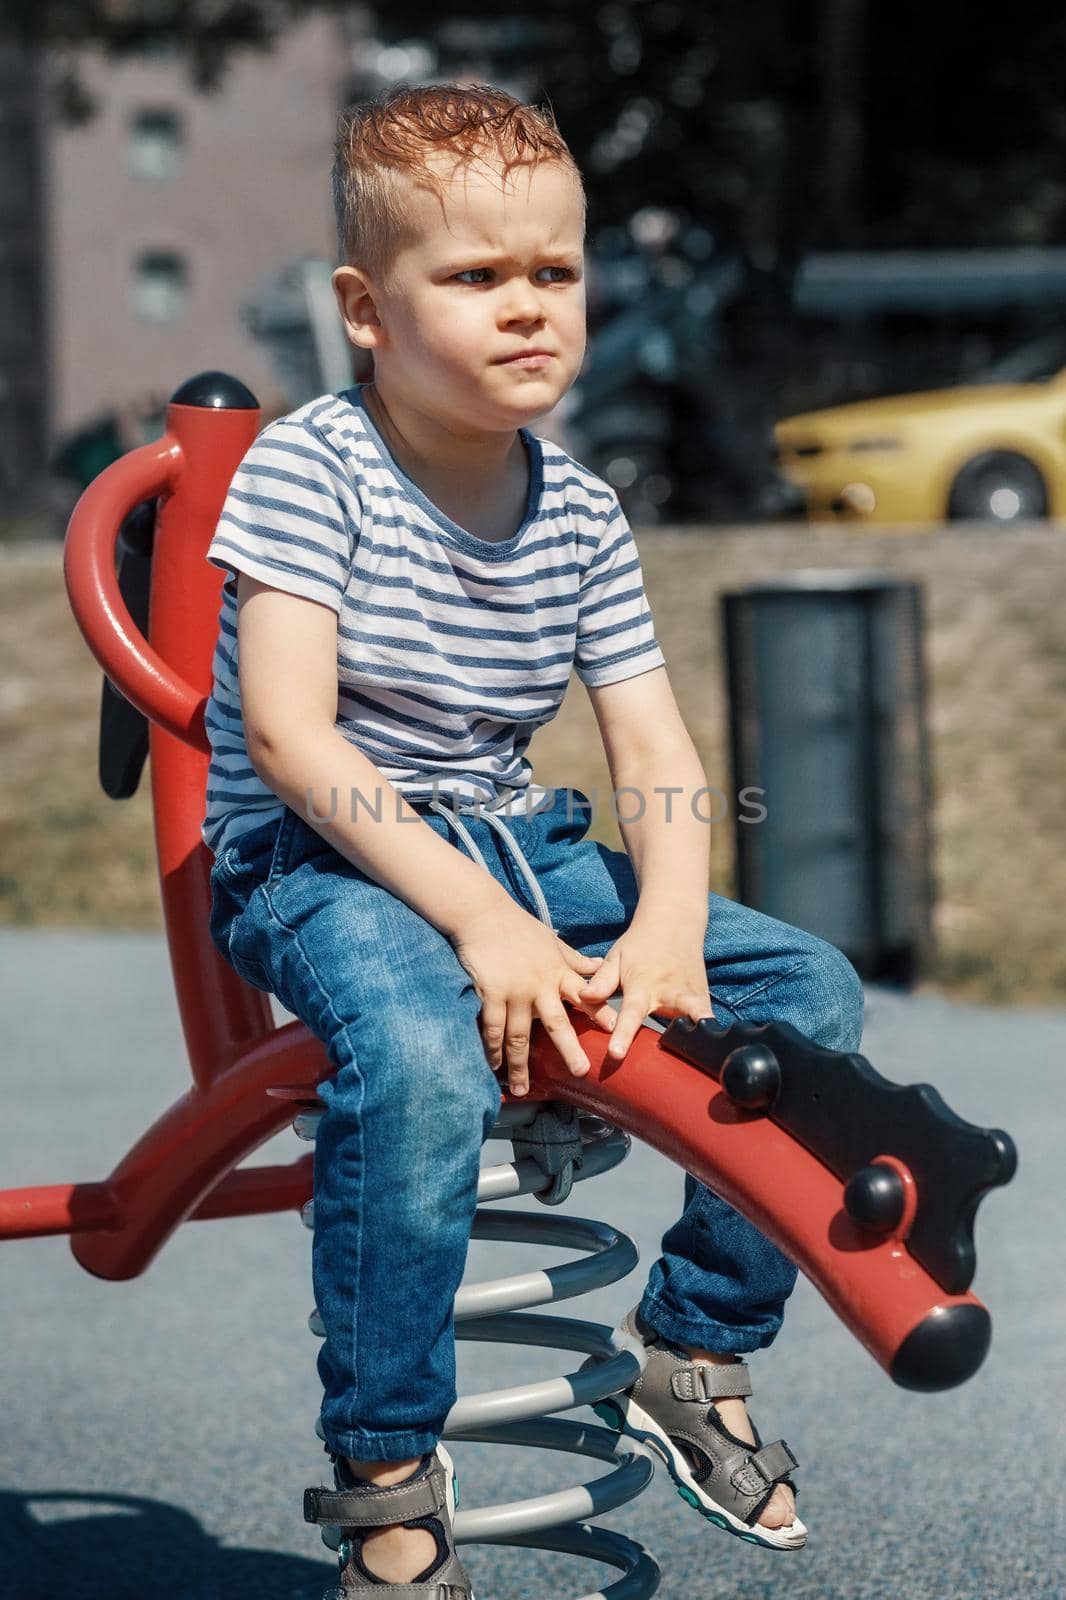 A thoughtful boy on a spring swing in a playground.